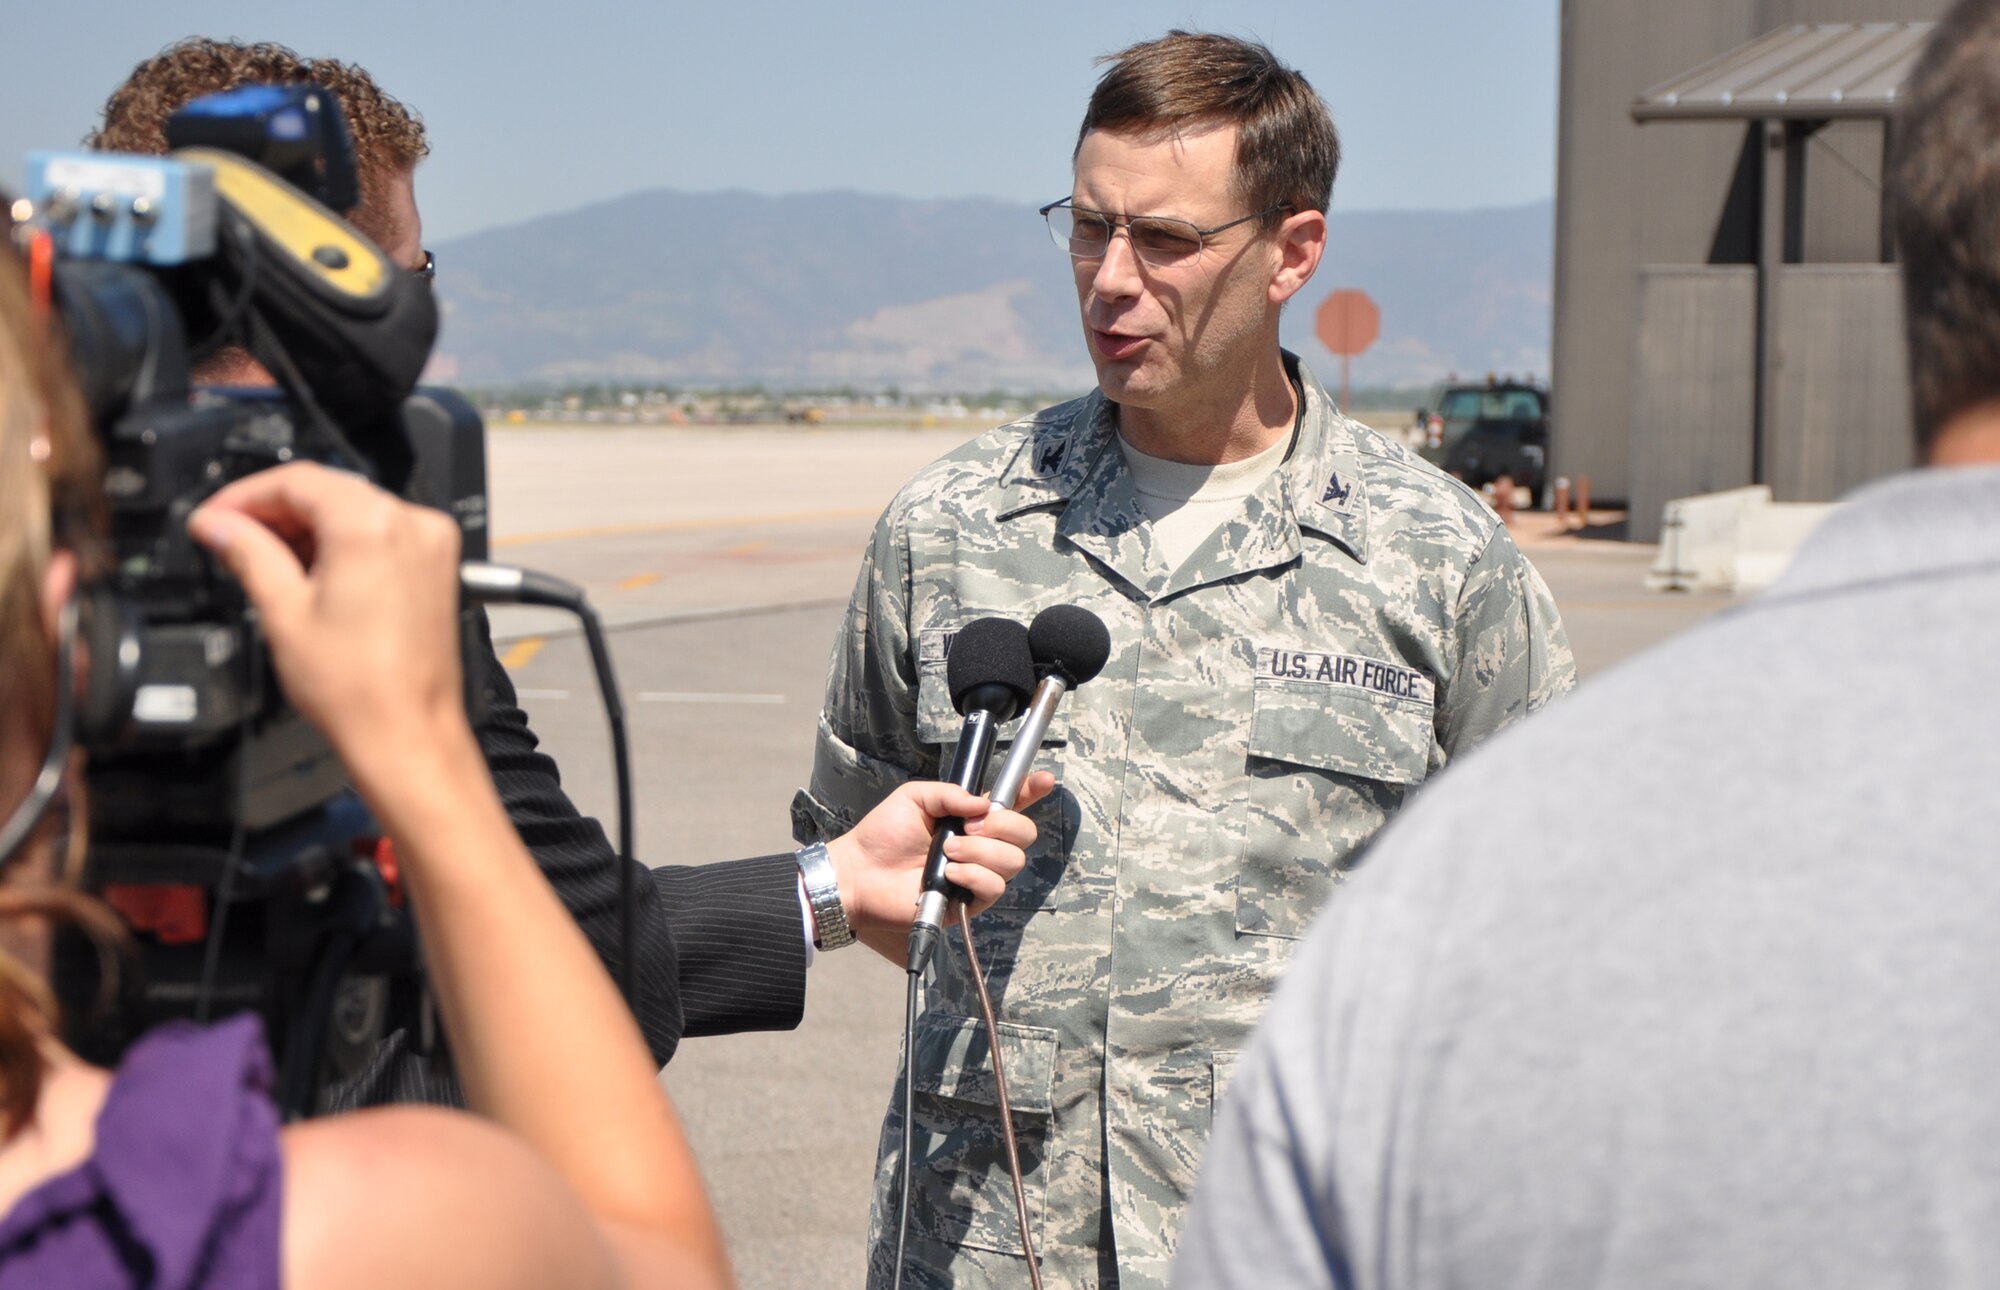 Col. James Van Housen, maintenance group commander for the 302nd Airlift Wing talks with Colorado Springs media after two Modular Airborne Fire Fighting System-equipped C-130s departed here for Kirtland Air Force Base, N.M. The two planes and 26 reservists will assist in wildland fire-fighting efforts in New Mexico and Arizona. (U.S. Air Force photo/Tech. Sgt. Daniel Butterfield) 